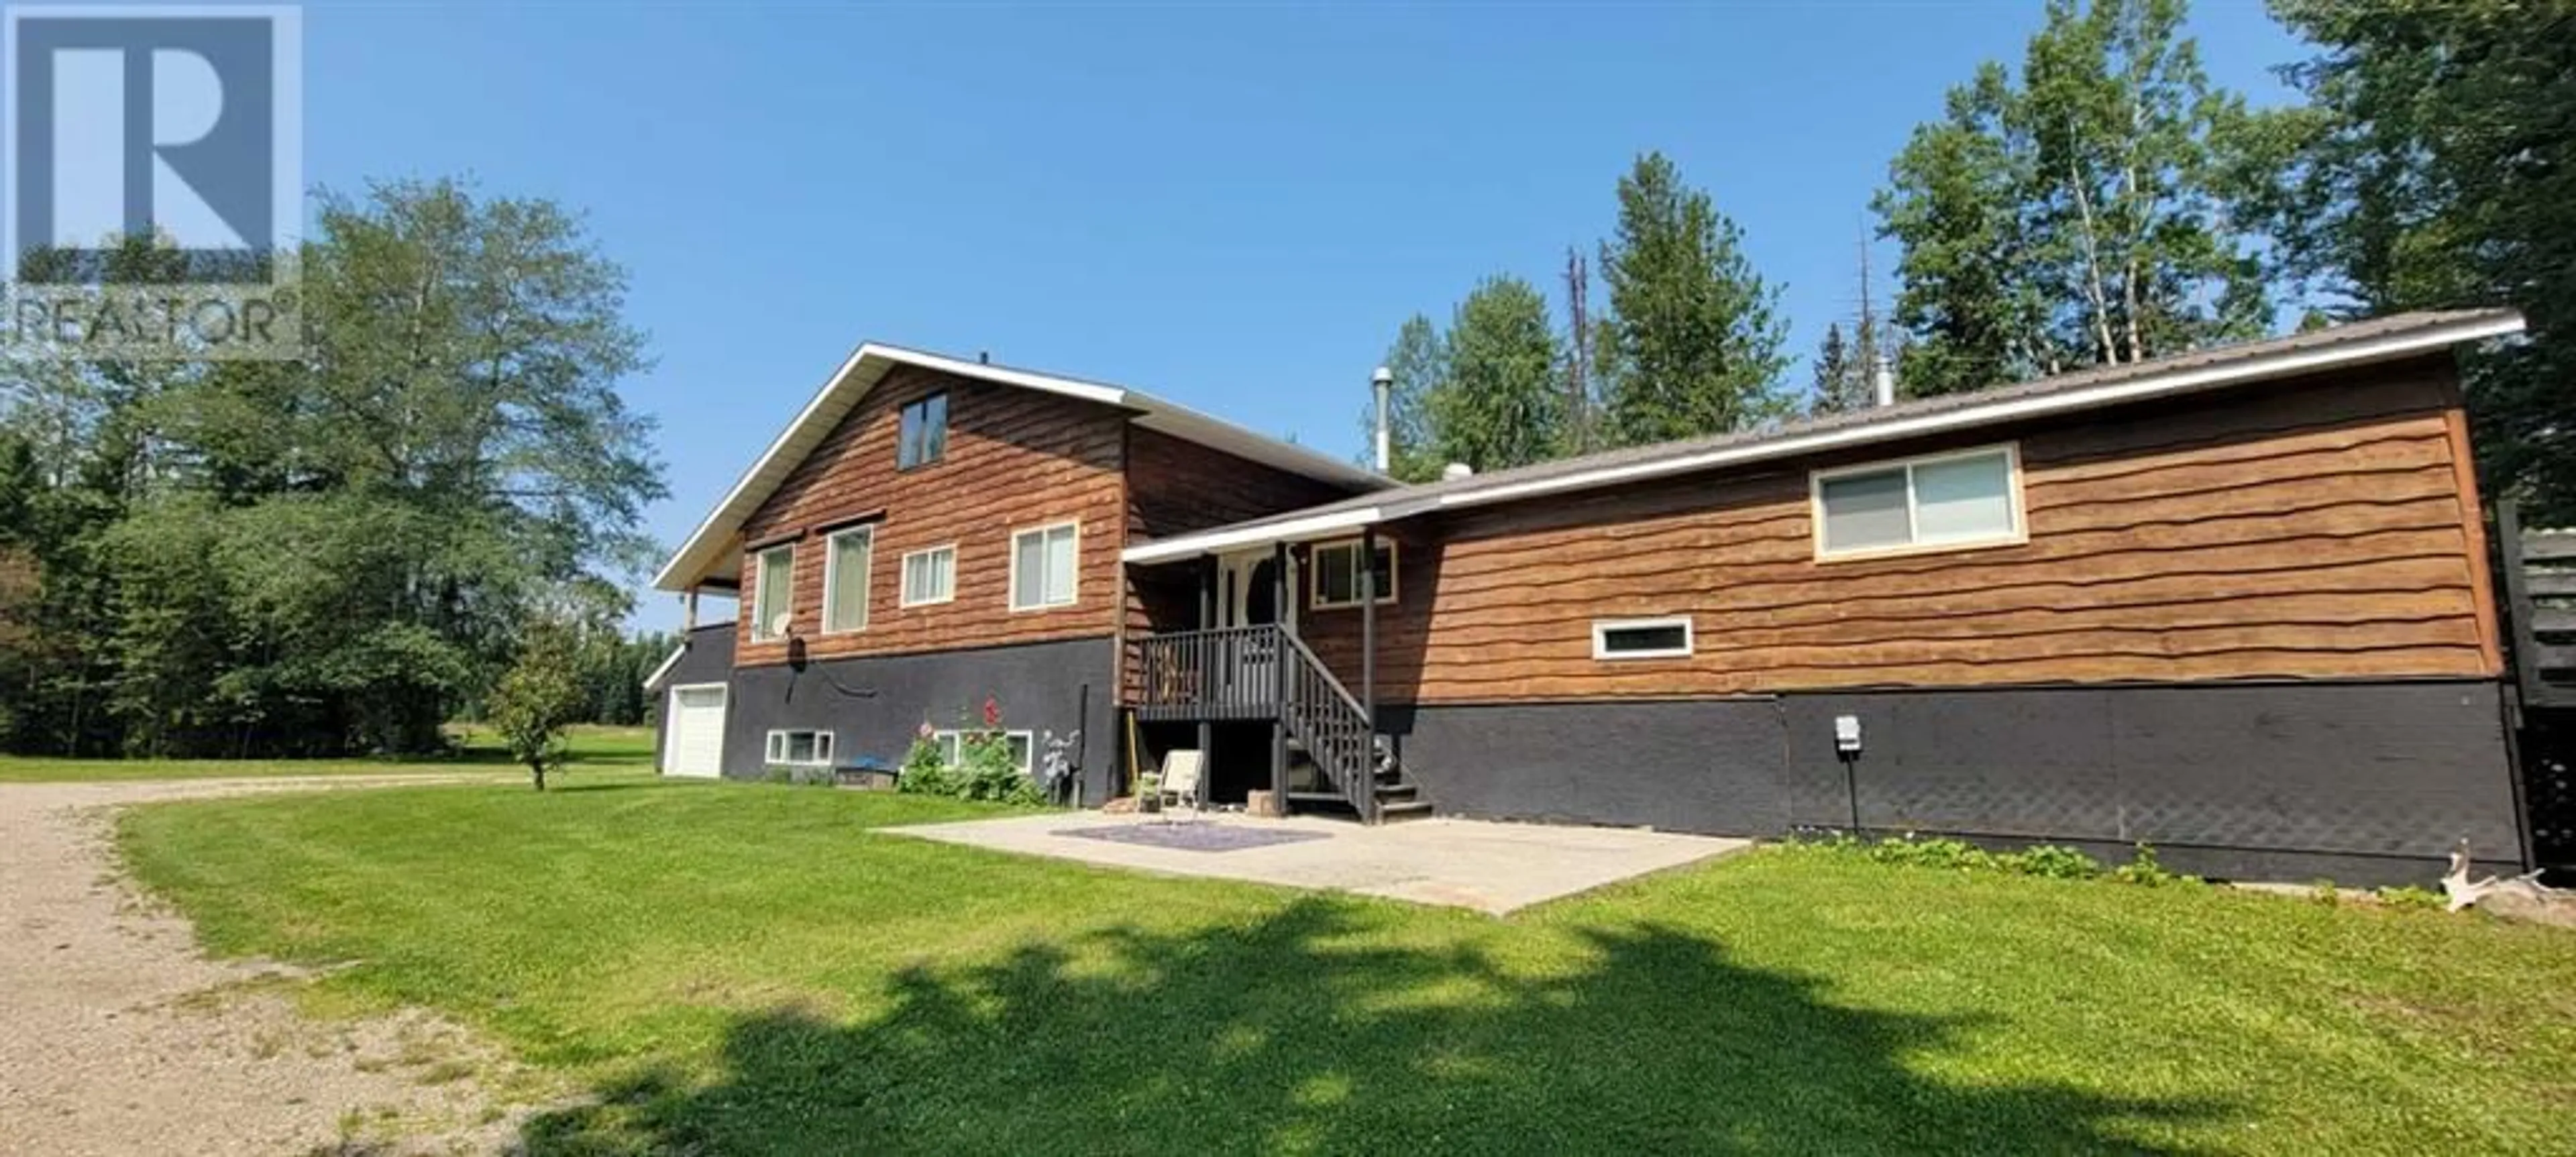 Home with vinyl exterior material for 53504 Range Road 170, Rural Yellowhead County Alberta T7E3K8